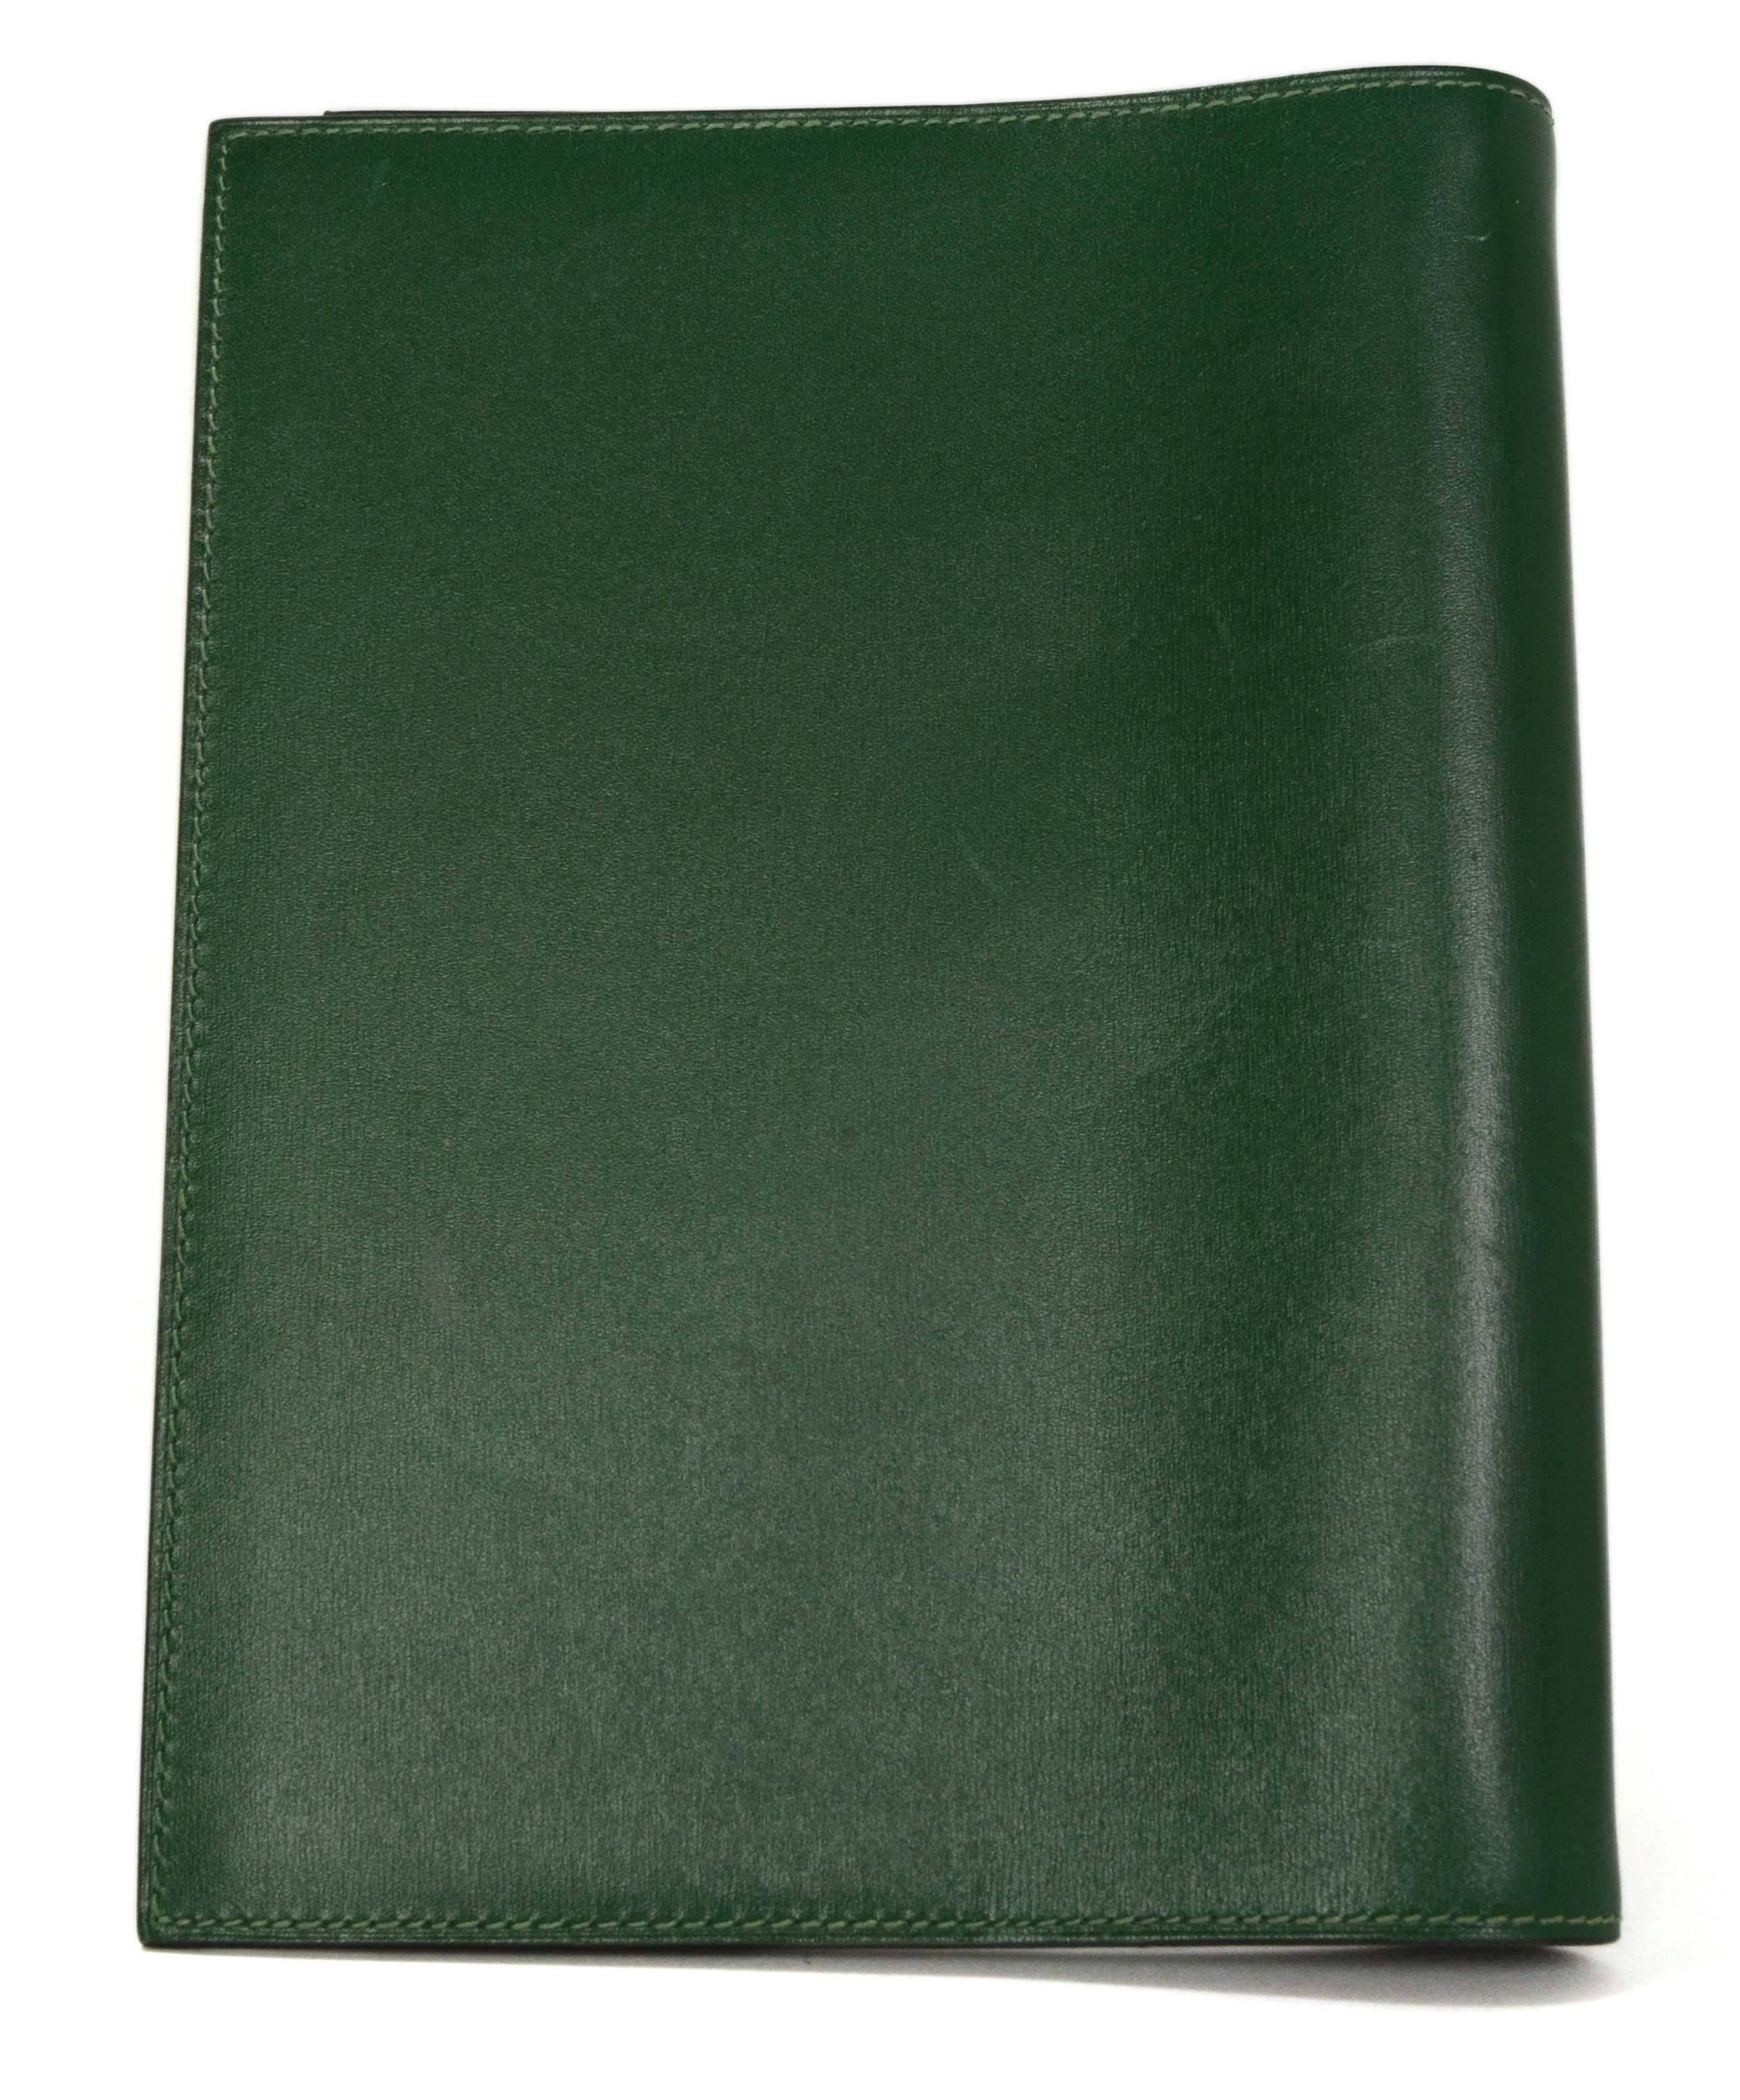 Hermes Green Leather Agenda Cover 
Made In: France
Year of Production: 2000
Color: Green
Hardware: Palladium
Materials: Leather and metal
Lining: Green leather
Closure: Bi-fold
Exterior Pockets: None
Interior Pockets: One vertical